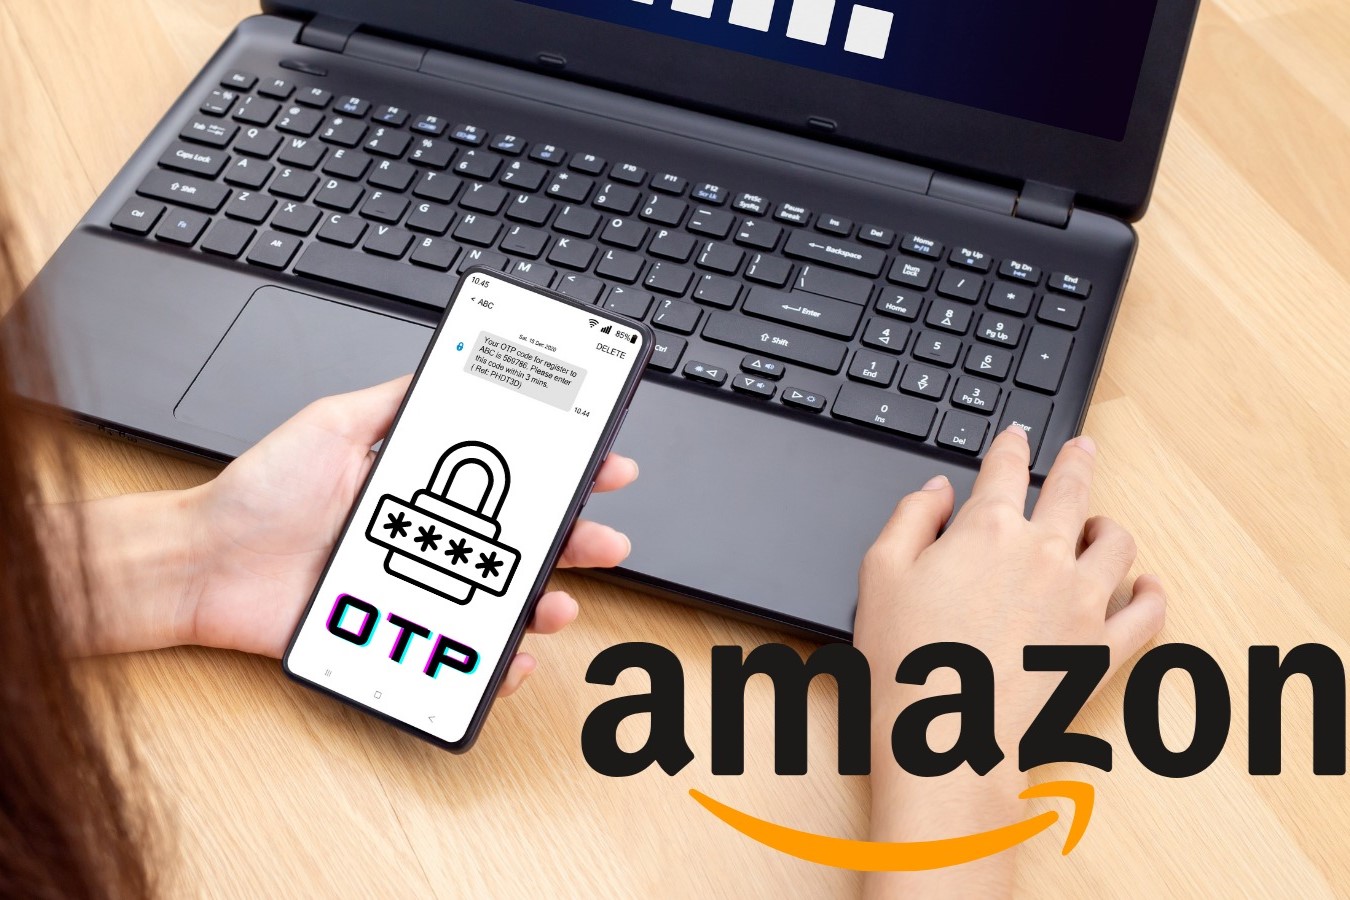 Amazon's Mysterious OTP Messages: What's Really Going On?